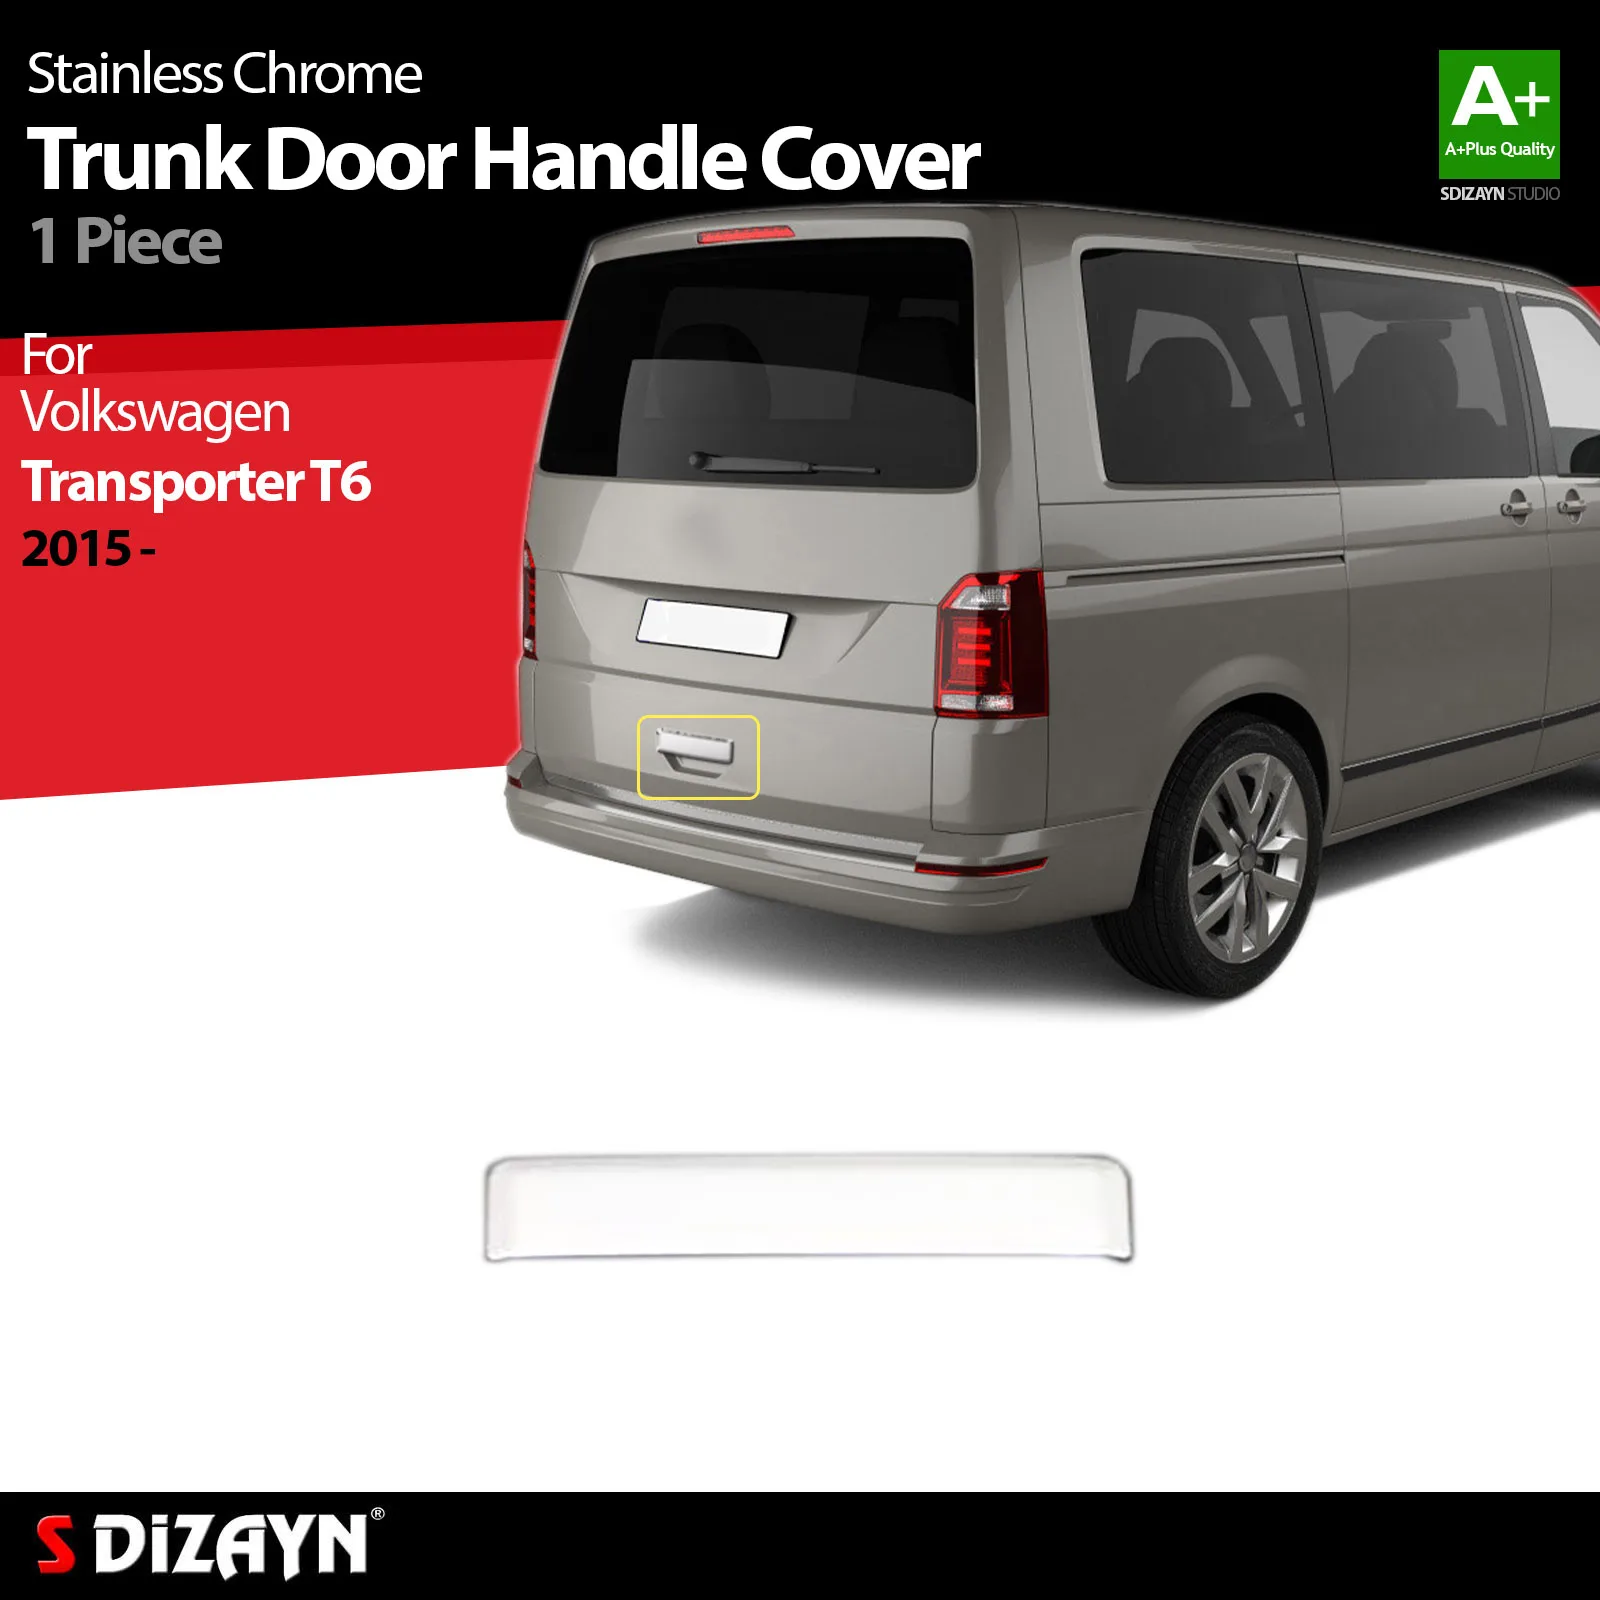 S Dizayn For Volkswagen Transporter T6 Chrome Trunk Door Handle Cover Stainless Steel VW Exterior Car Accessories Parts Auto